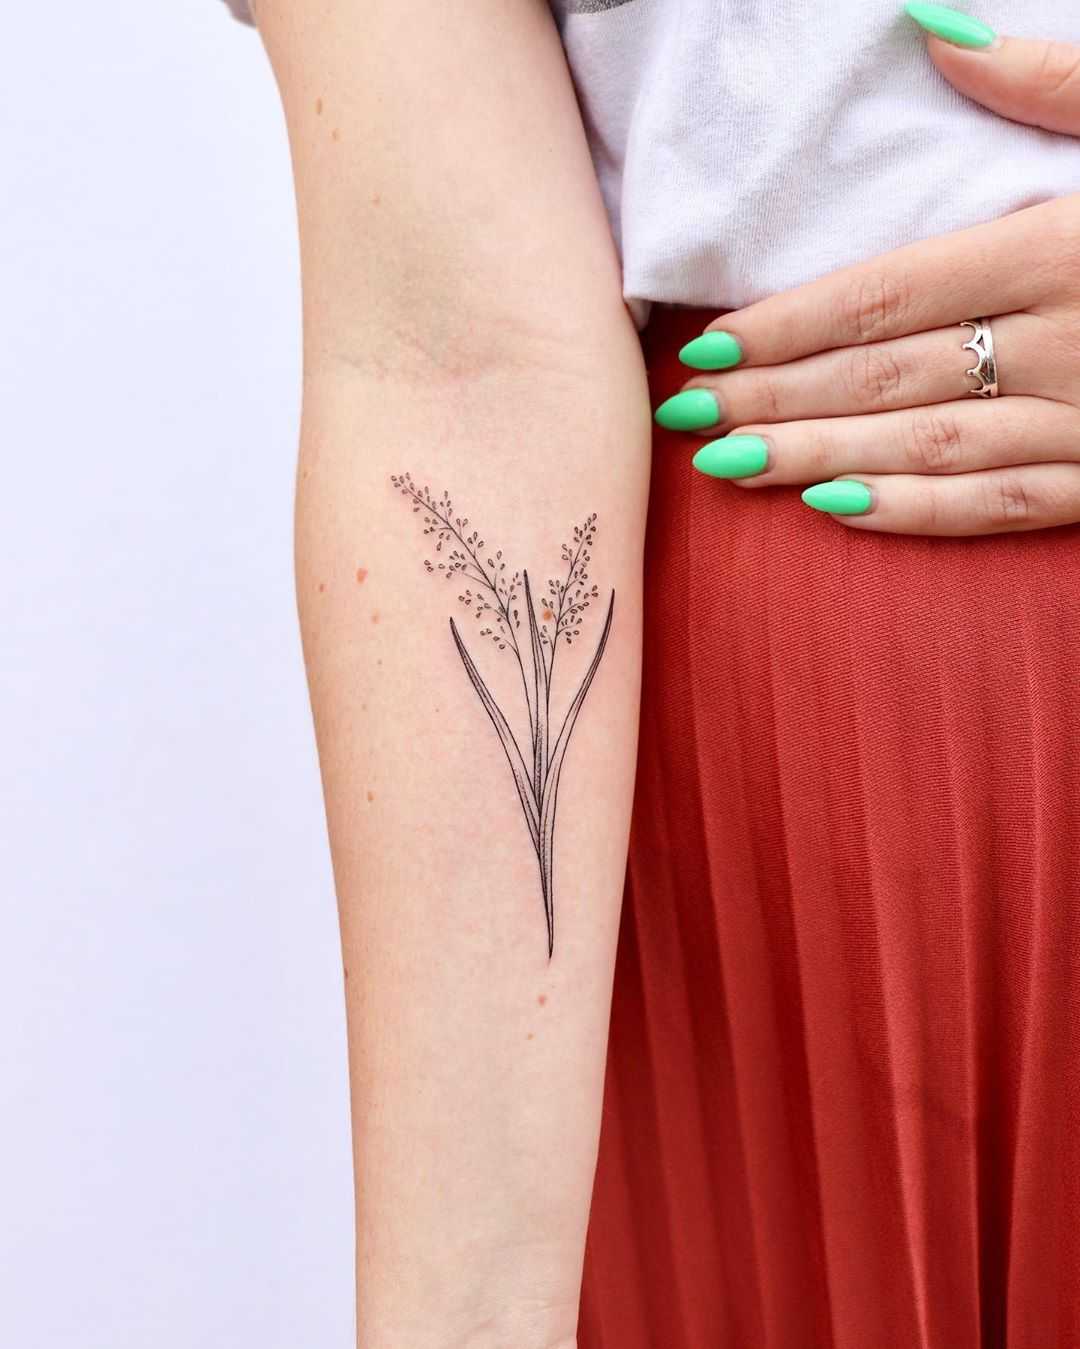 Tattoo inspired by Walt Whitmans Leaves of Grass by Zaya Hastra